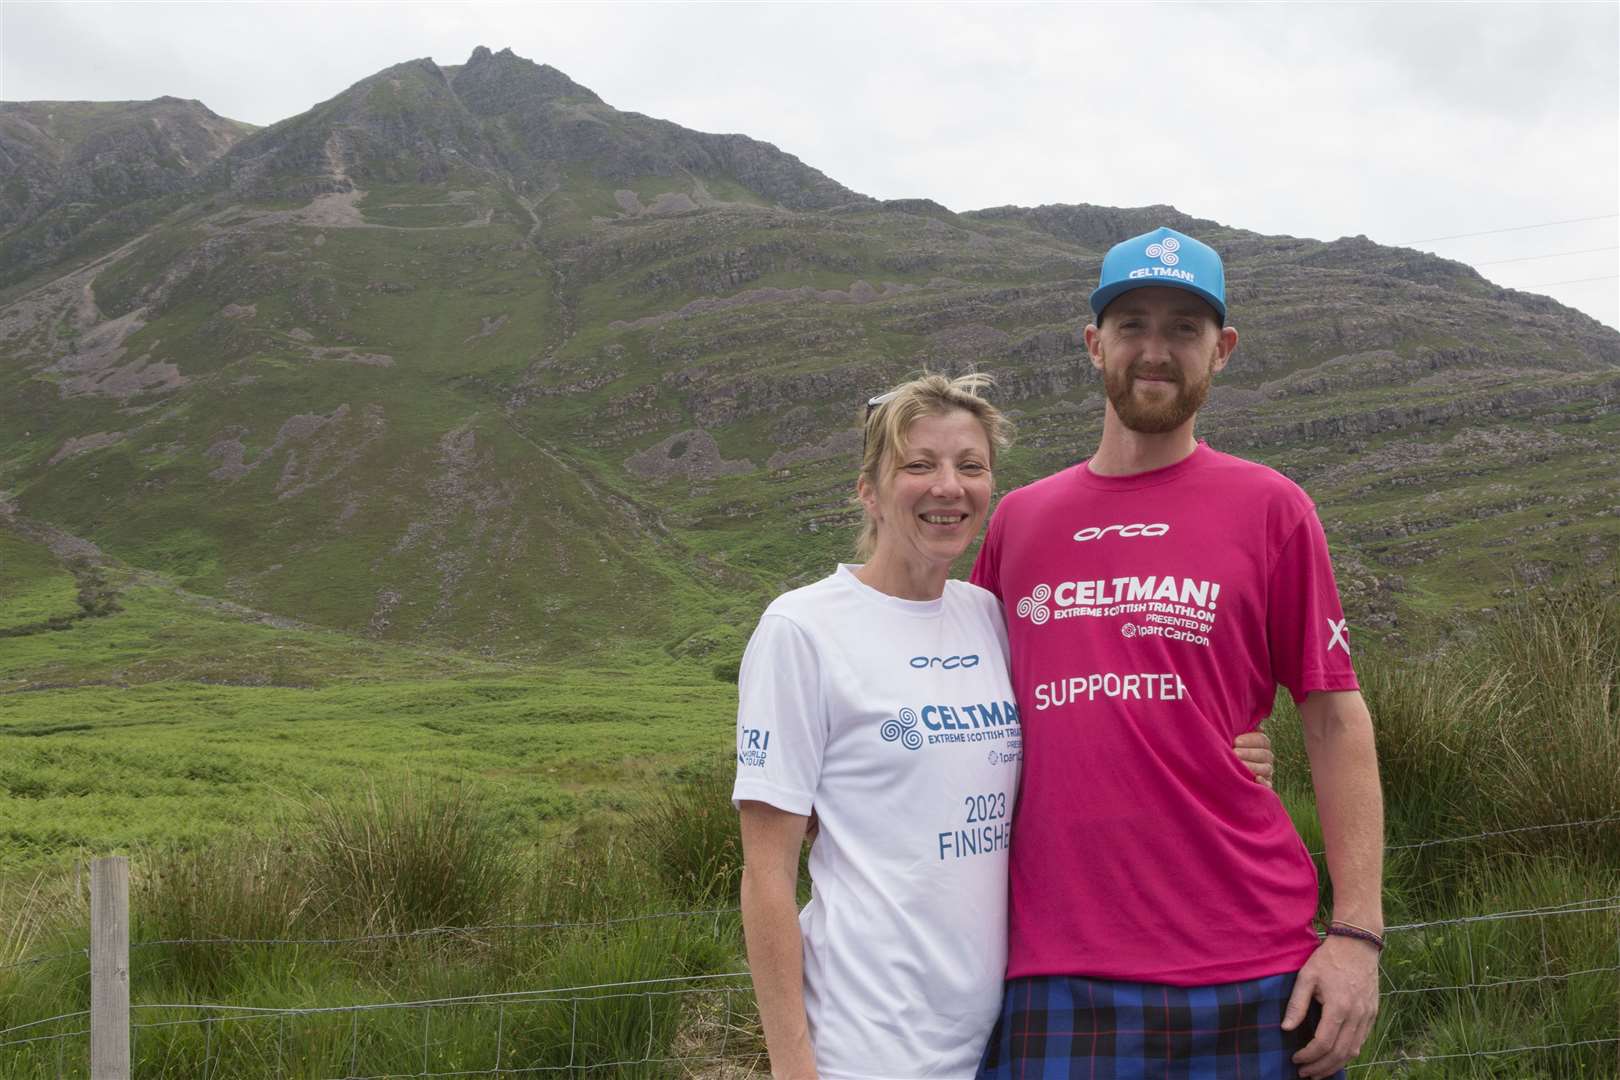 The day after the proposal Debbie Larnach and Steven Munro in Torrodon for the teeshirt ceremony where she and others received their Celtman Extreme Scottish Triathlon finishers teeshirts. Photo: Robert MacDonald/Northern Studios